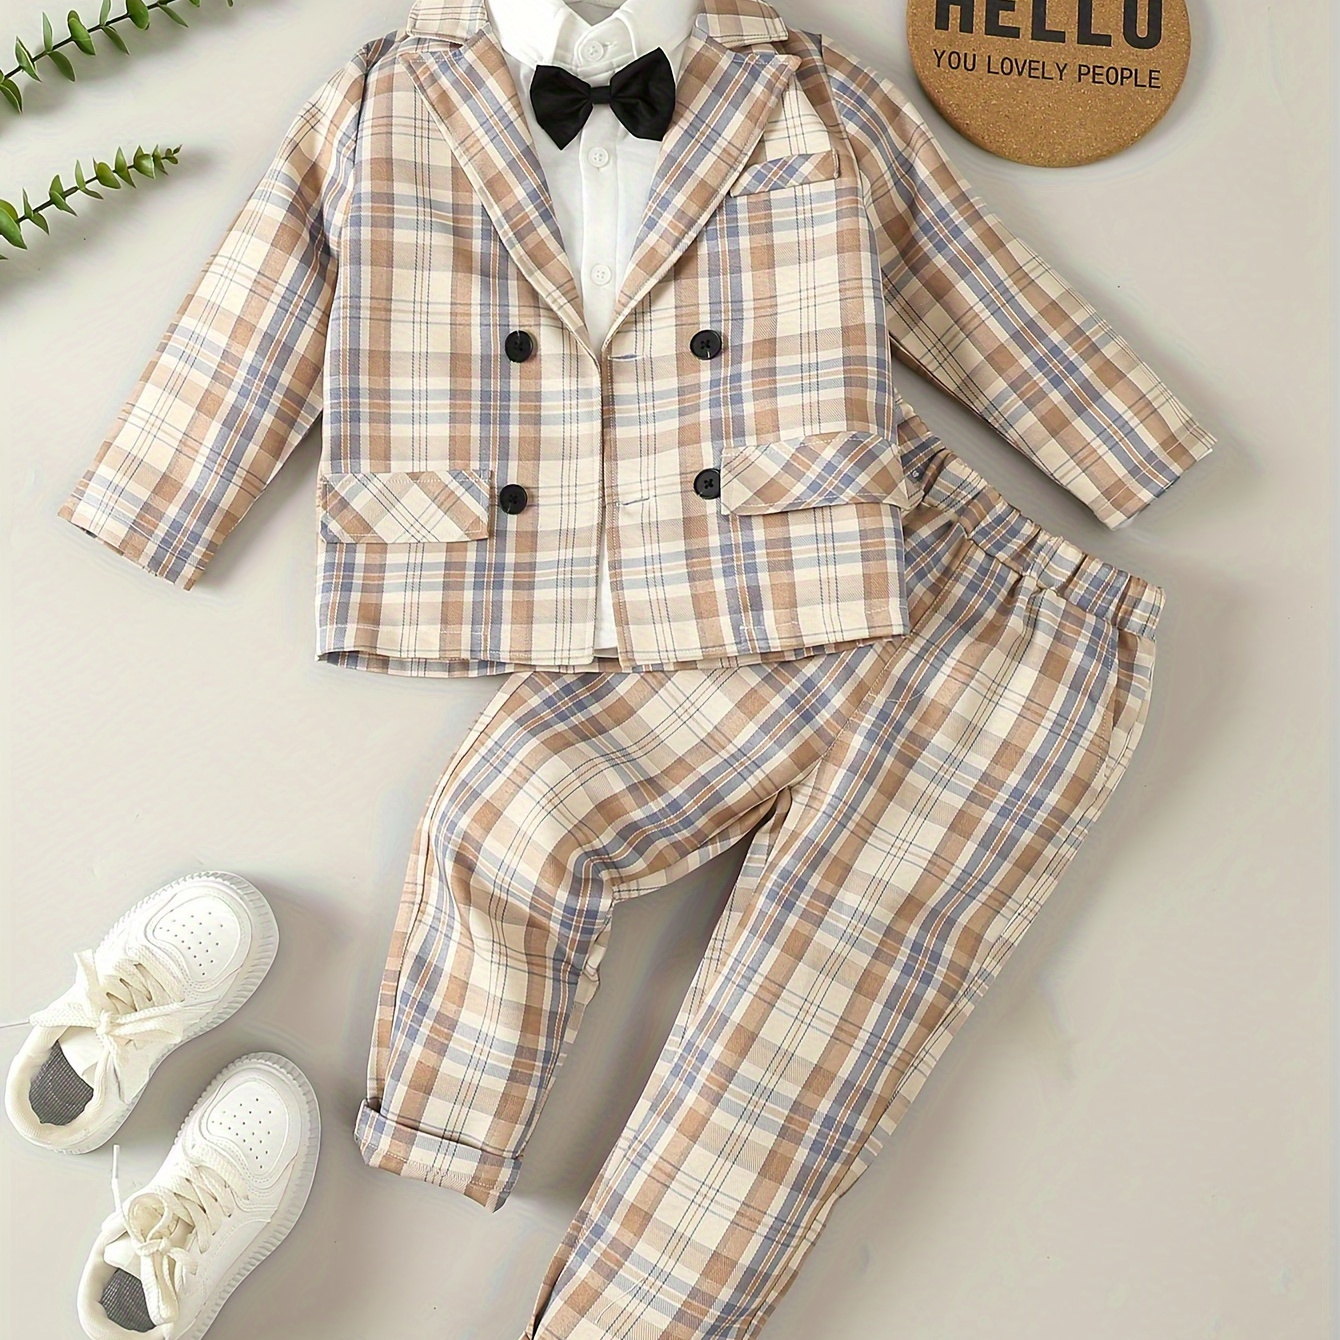 

Boys 3-piece Suit Set - Casual Spring/autumn Lightweight Checkered Gentleman Jacket With Long Sleeve White Shirt & Bow Tie + Matching Plaid Trousers, Formal Performance Attire For Events